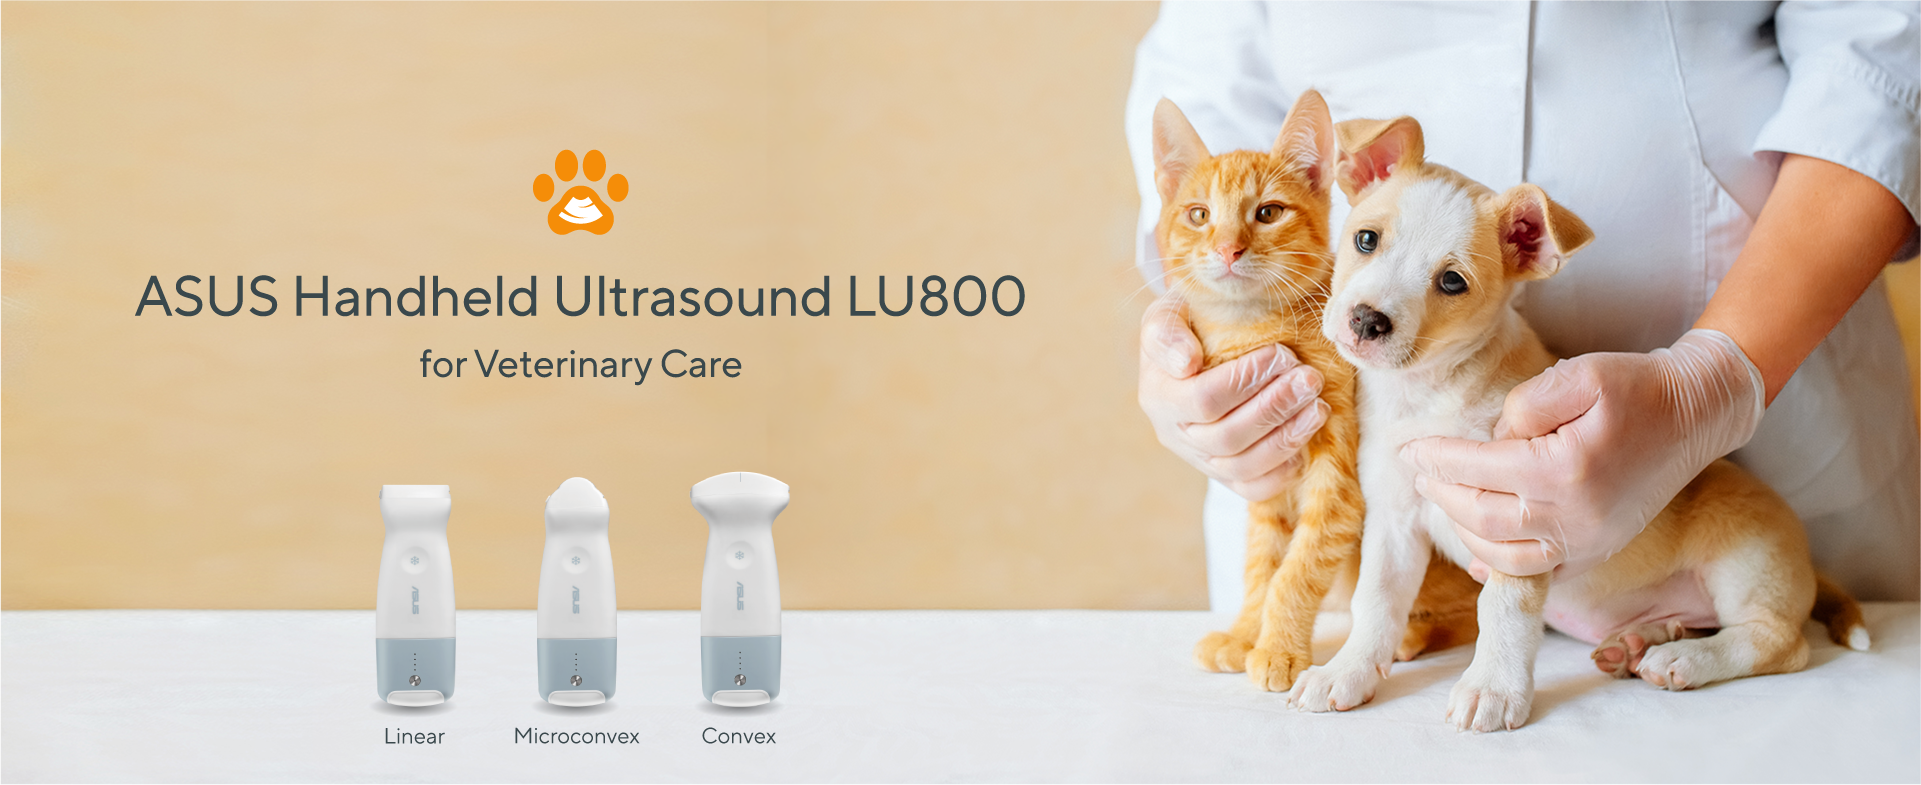 The veterinarian holds the kittens and puppies, caring for their health and recommending the use of ASUS Handheld Ultrasound LU800 for pet care.